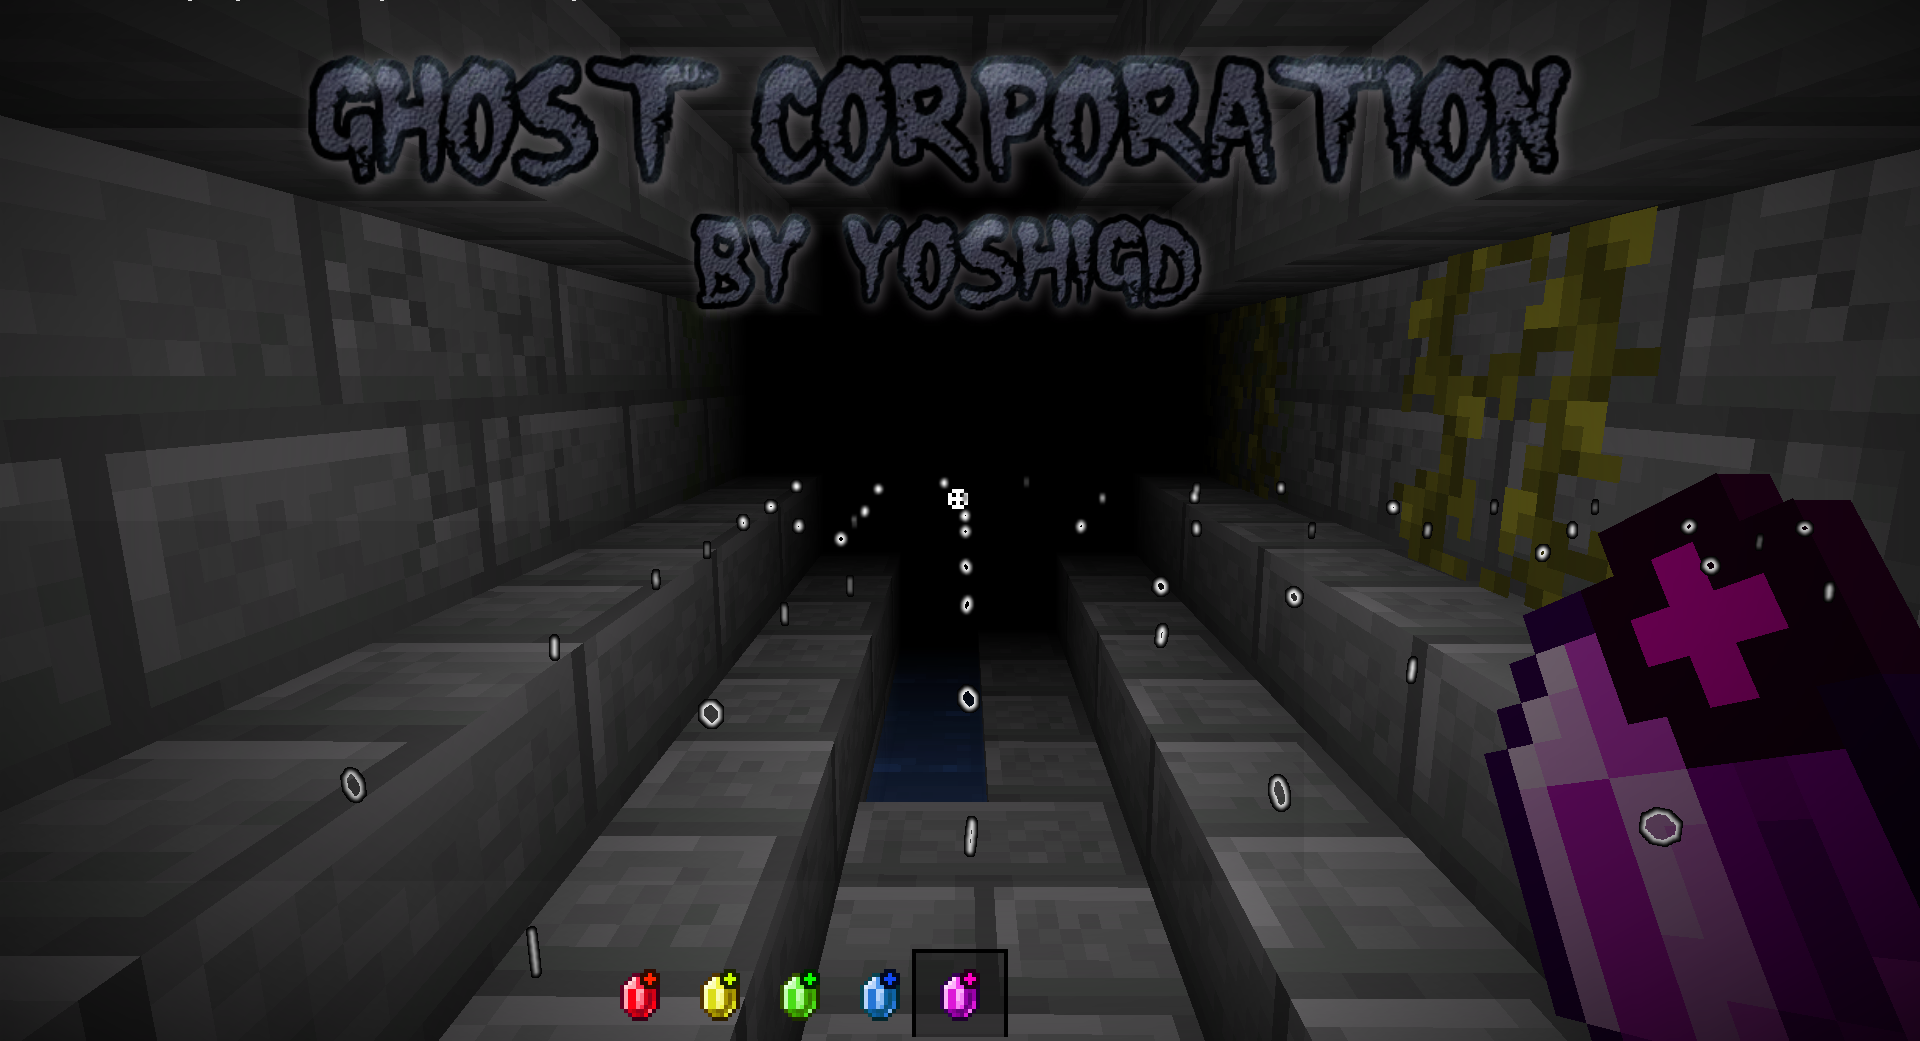 Download Ghost Corporation for Minecraft 1.14.2